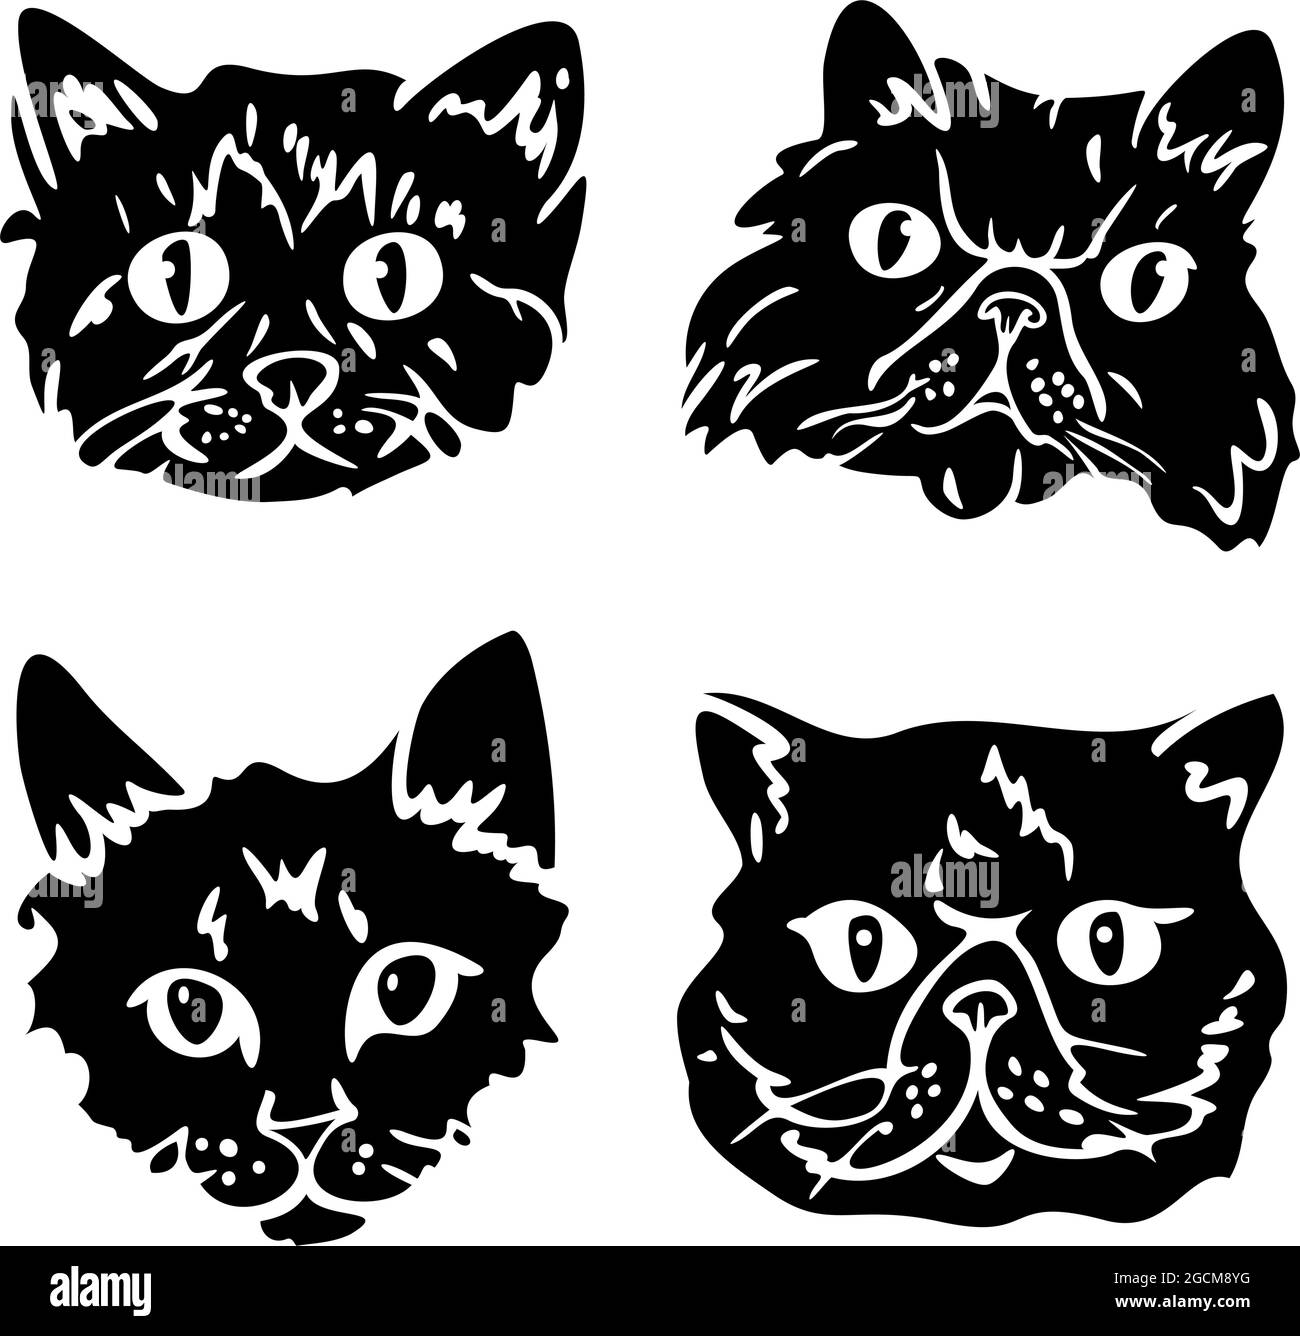 Silhouette of cat icon Stock Vector by ©PPVector 129404604